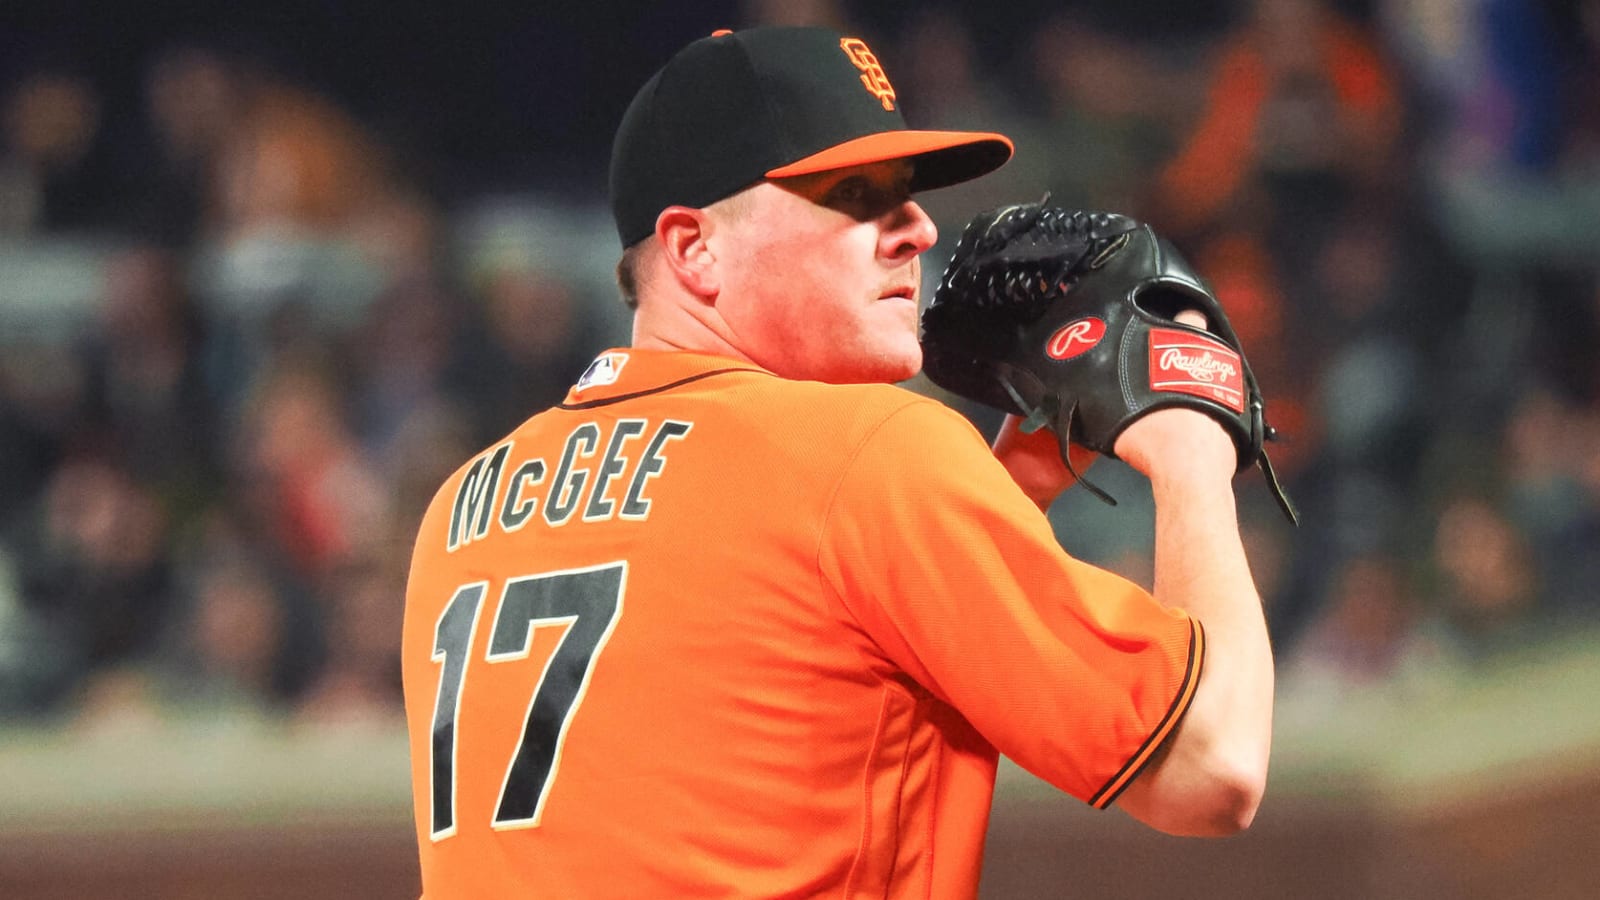 Brewers sign LHP Jake McGee to major league deal